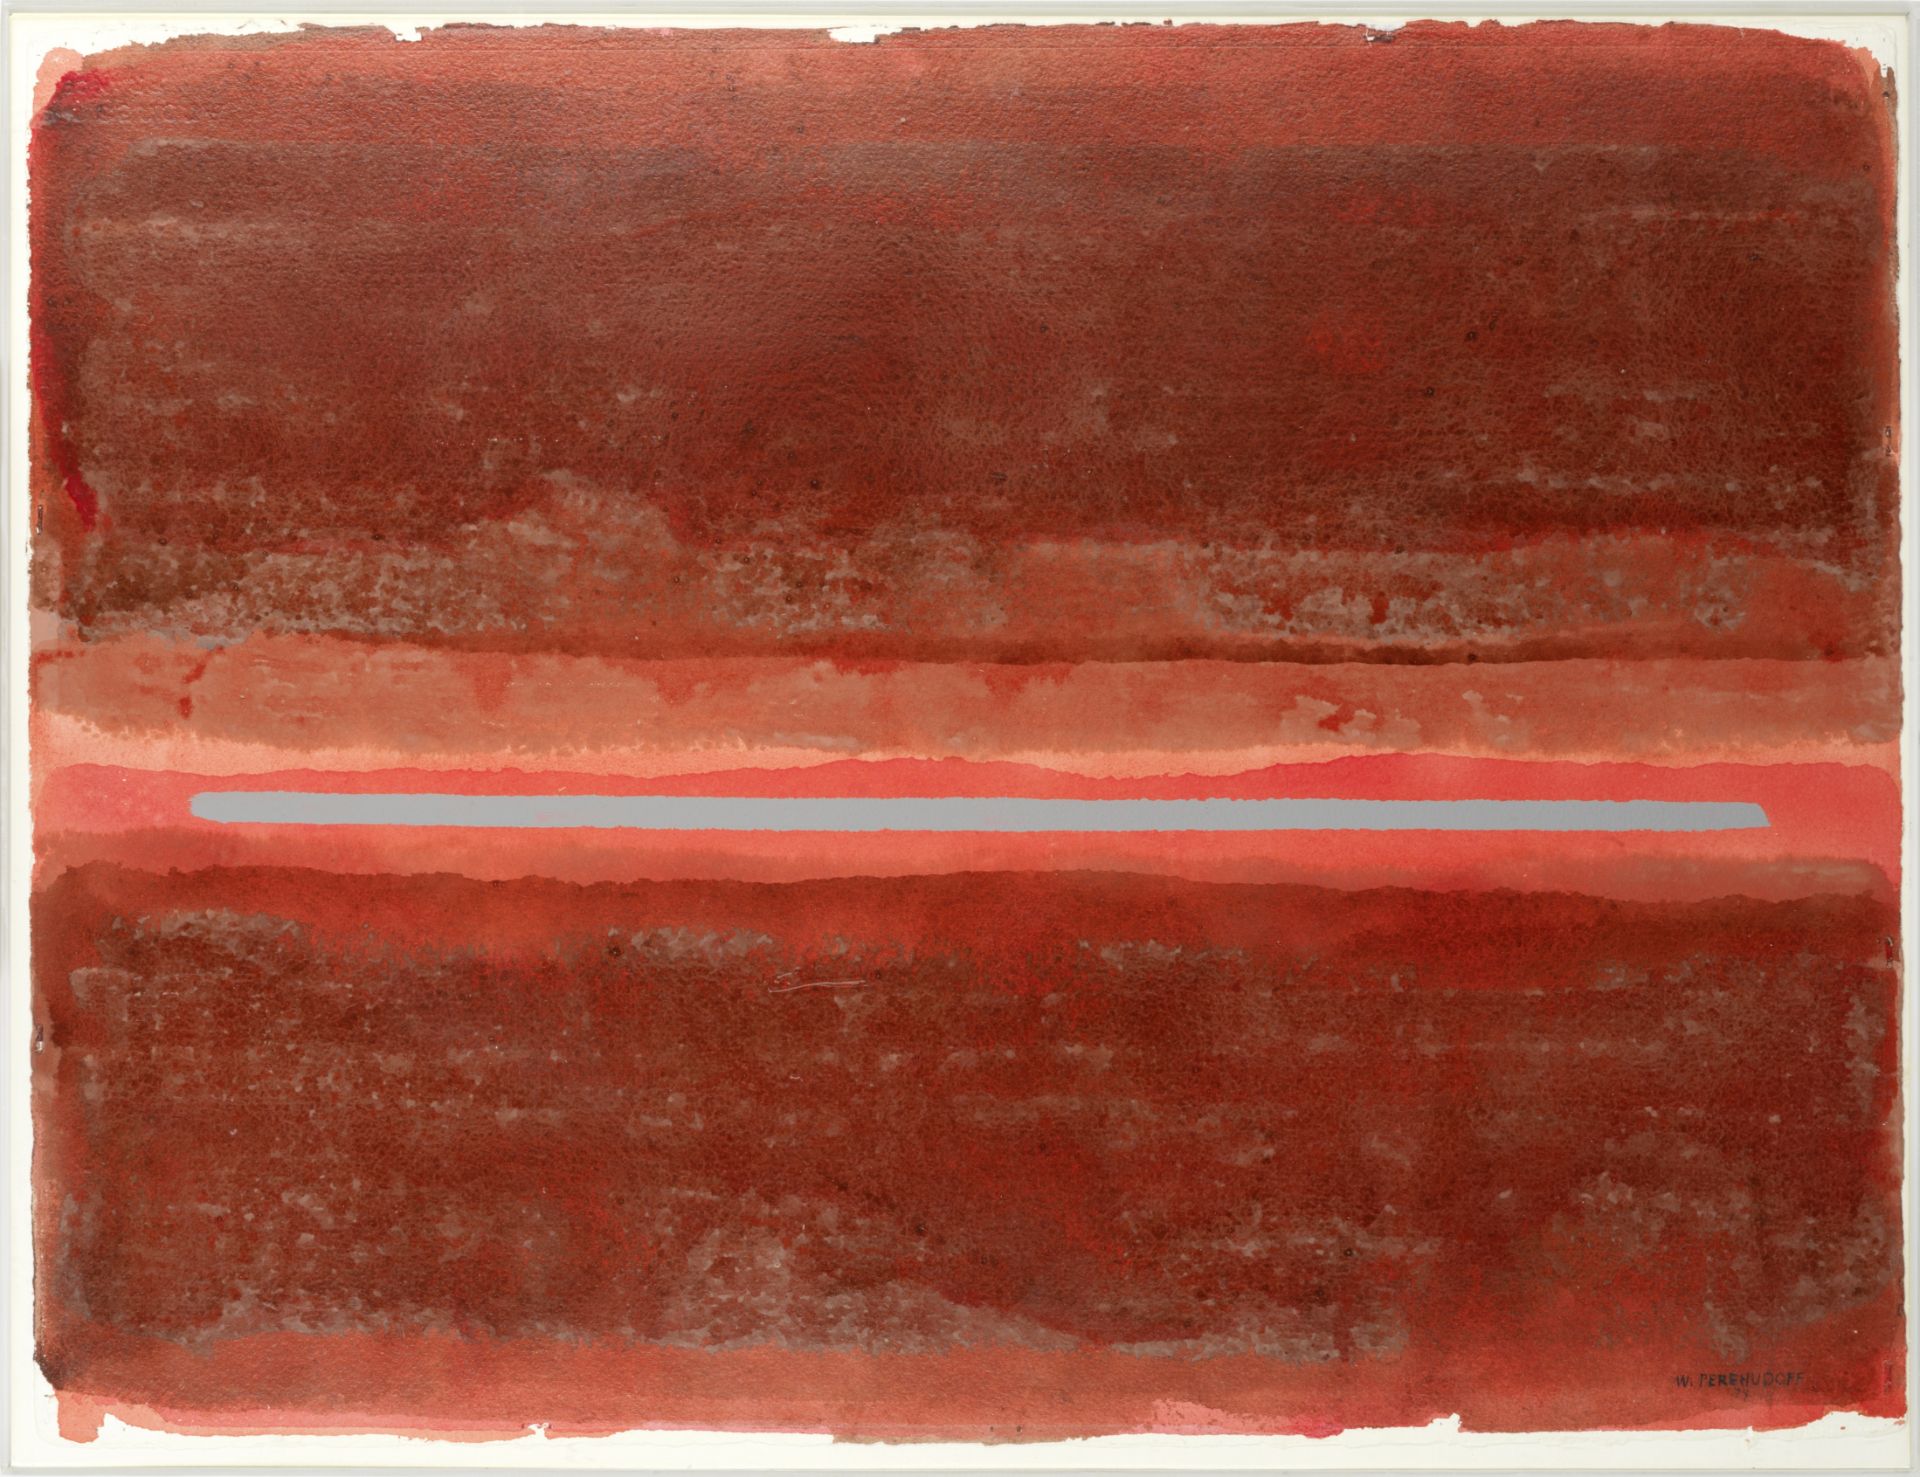 William Perehudoff R.C.A. (Canadian, 1919-2013) Colour field study in red